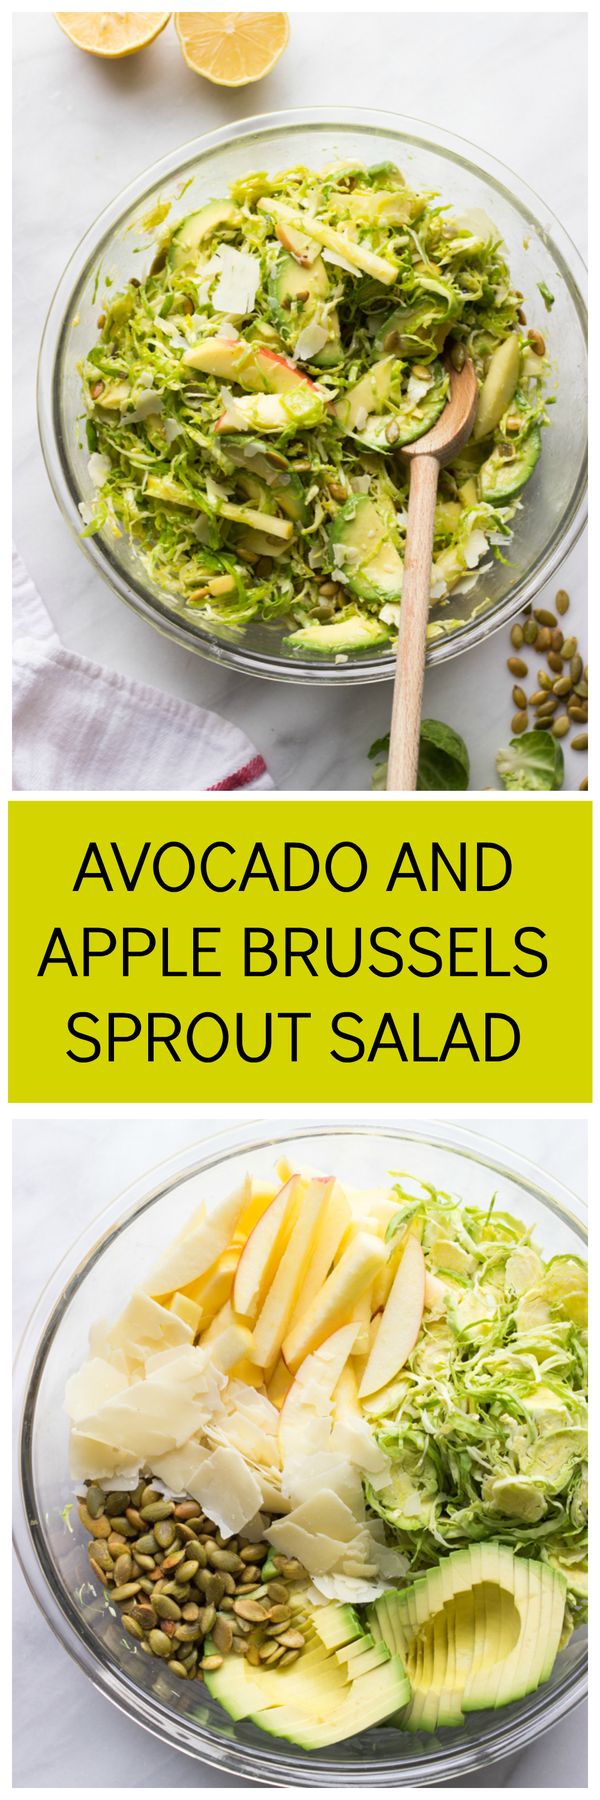 Avocado and Apple Brussels Sprout Salad